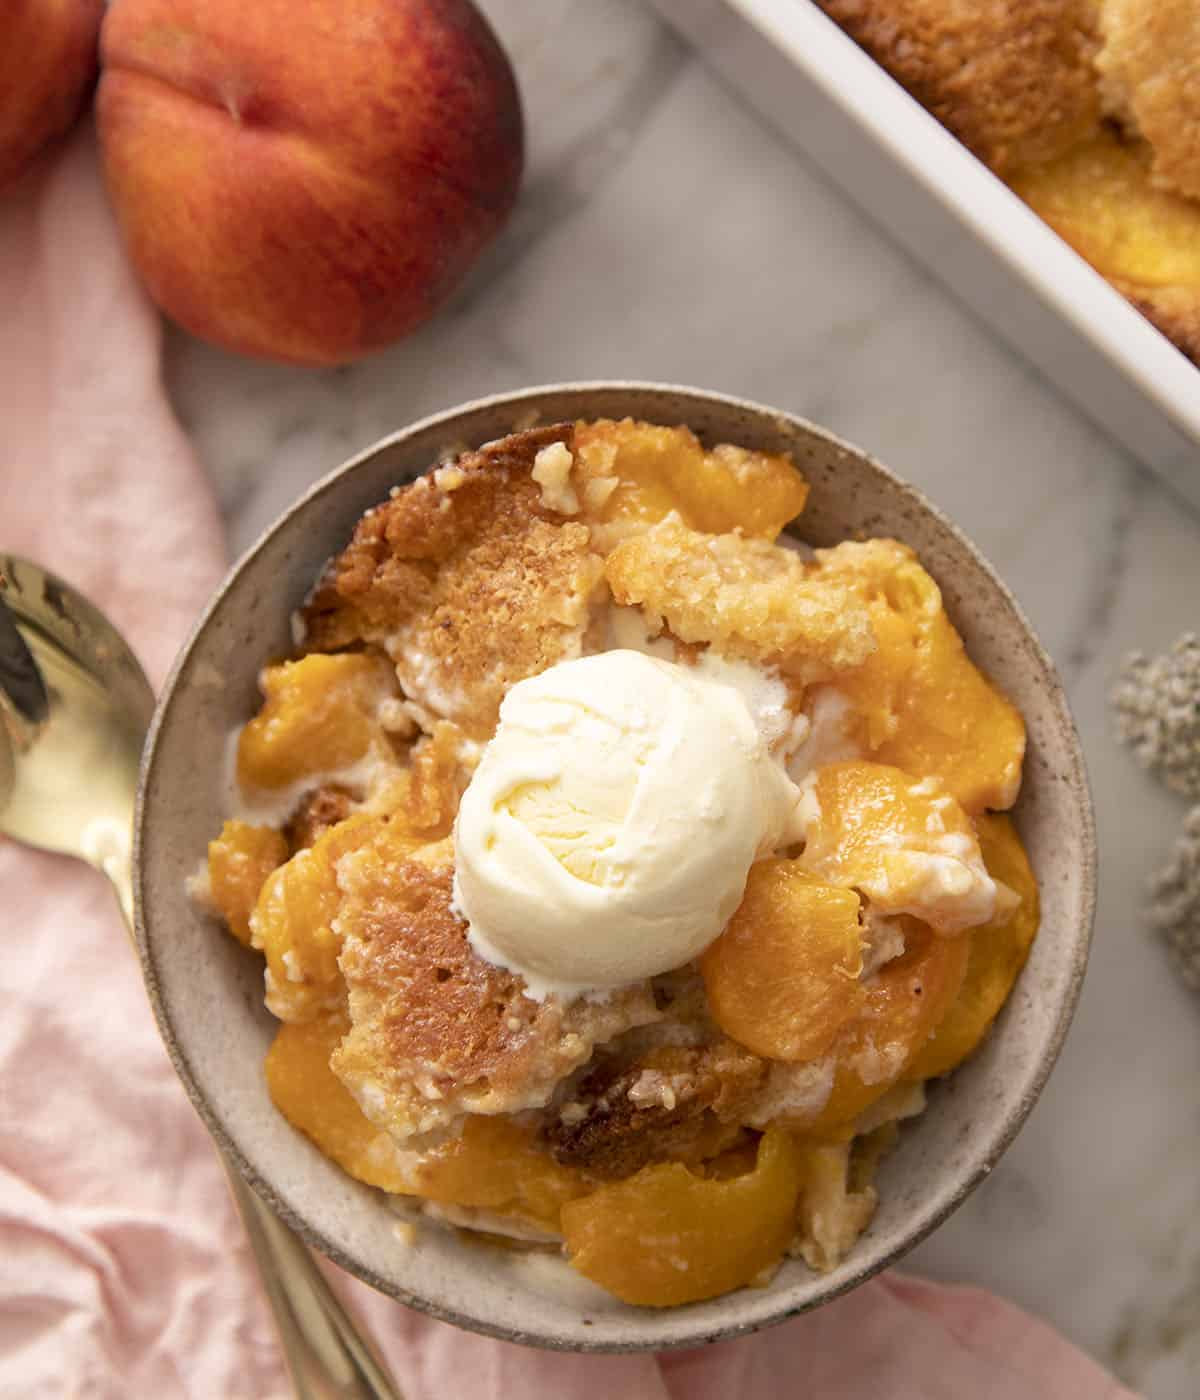 Peach cobbler in a grey bowl with ice cream.